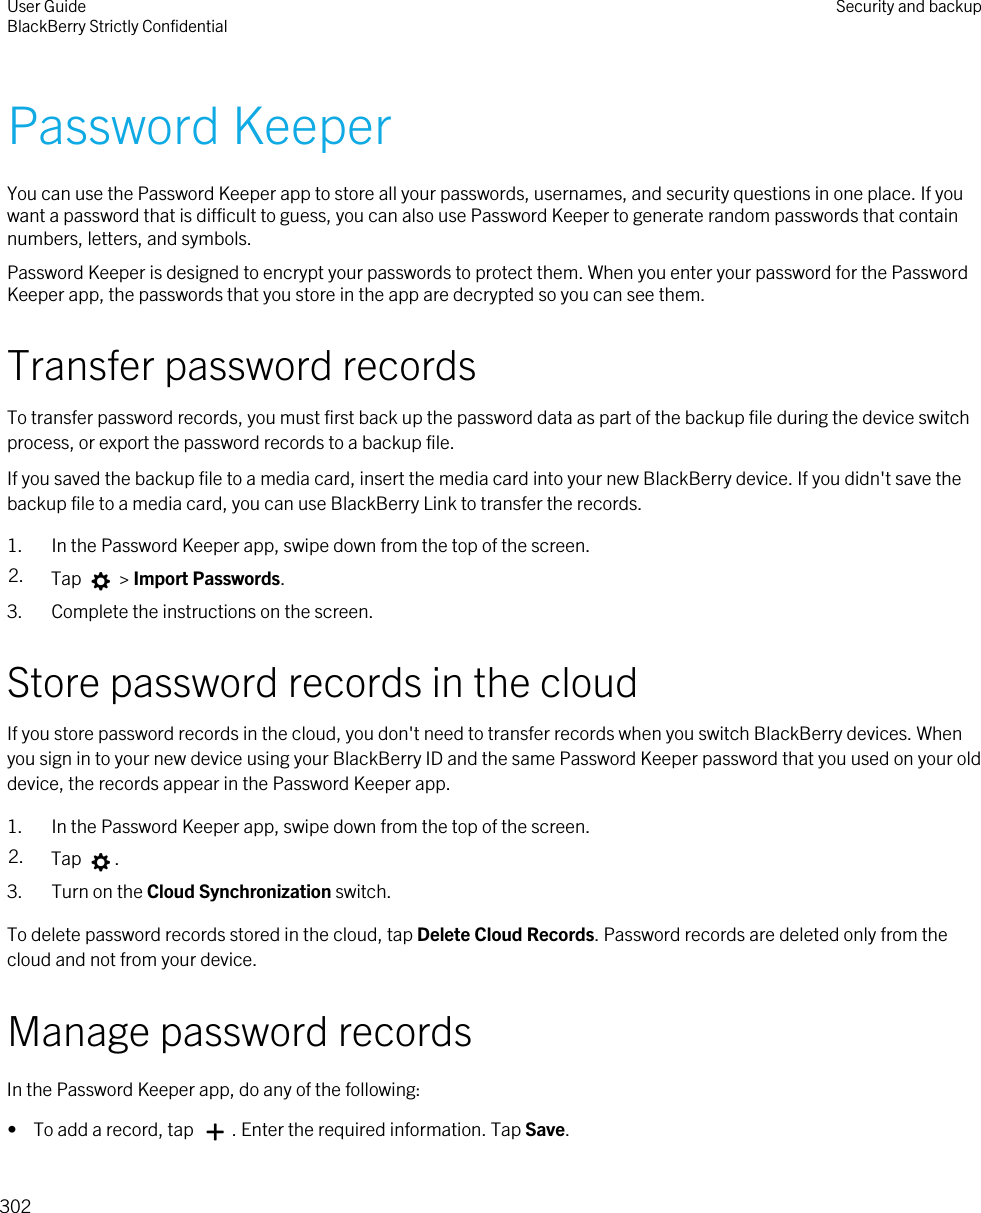 Password KeeperYou can use the Password Keeper app to store all your passwords, usernames, and security questions in one place. If you want a password that is difficult to guess, you can also use Password Keeper to generate random passwords that contain numbers, letters, and symbols.Password Keeper is designed to encrypt your passwords to protect them. When you enter your password for the Password Keeper app, the passwords that you store in the app are decrypted so you can see them.Transfer password recordsTo transfer password records, you must first back up the password data as part of the backup file during the device switch process, or export the password records to a backup file.If you saved the backup file to a media card, insert the media card into your new BlackBerry device. If you didn&apos;t save the backup file to a media card, you can use BlackBerry Link to transfer the records.1. In the Password Keeper app, swipe down from the top of the screen.2. Tap   &gt; Import Passwords.3. Complete the instructions on the screen.Store password records in the cloudIf you store password records in the cloud, you don&apos;t need to transfer records when you switch BlackBerry devices. When you sign in to your new device using your BlackBerry ID and the same Password Keeper password that you used on your old device, the records appear in the Password Keeper app.1. In the Password Keeper app, swipe down from the top of the screen.2. Tap  .3. Turn on the Cloud Synchronization switch.To delete password records stored in the cloud, tap Delete Cloud Records. Password records are deleted only from the cloud and not from your device.Manage password recordsIn the Password Keeper app, do any of the following:•  To add a record, tap  . Enter the required information. Tap Save.User GuideBlackBerry Strictly Confidential Security and backup302